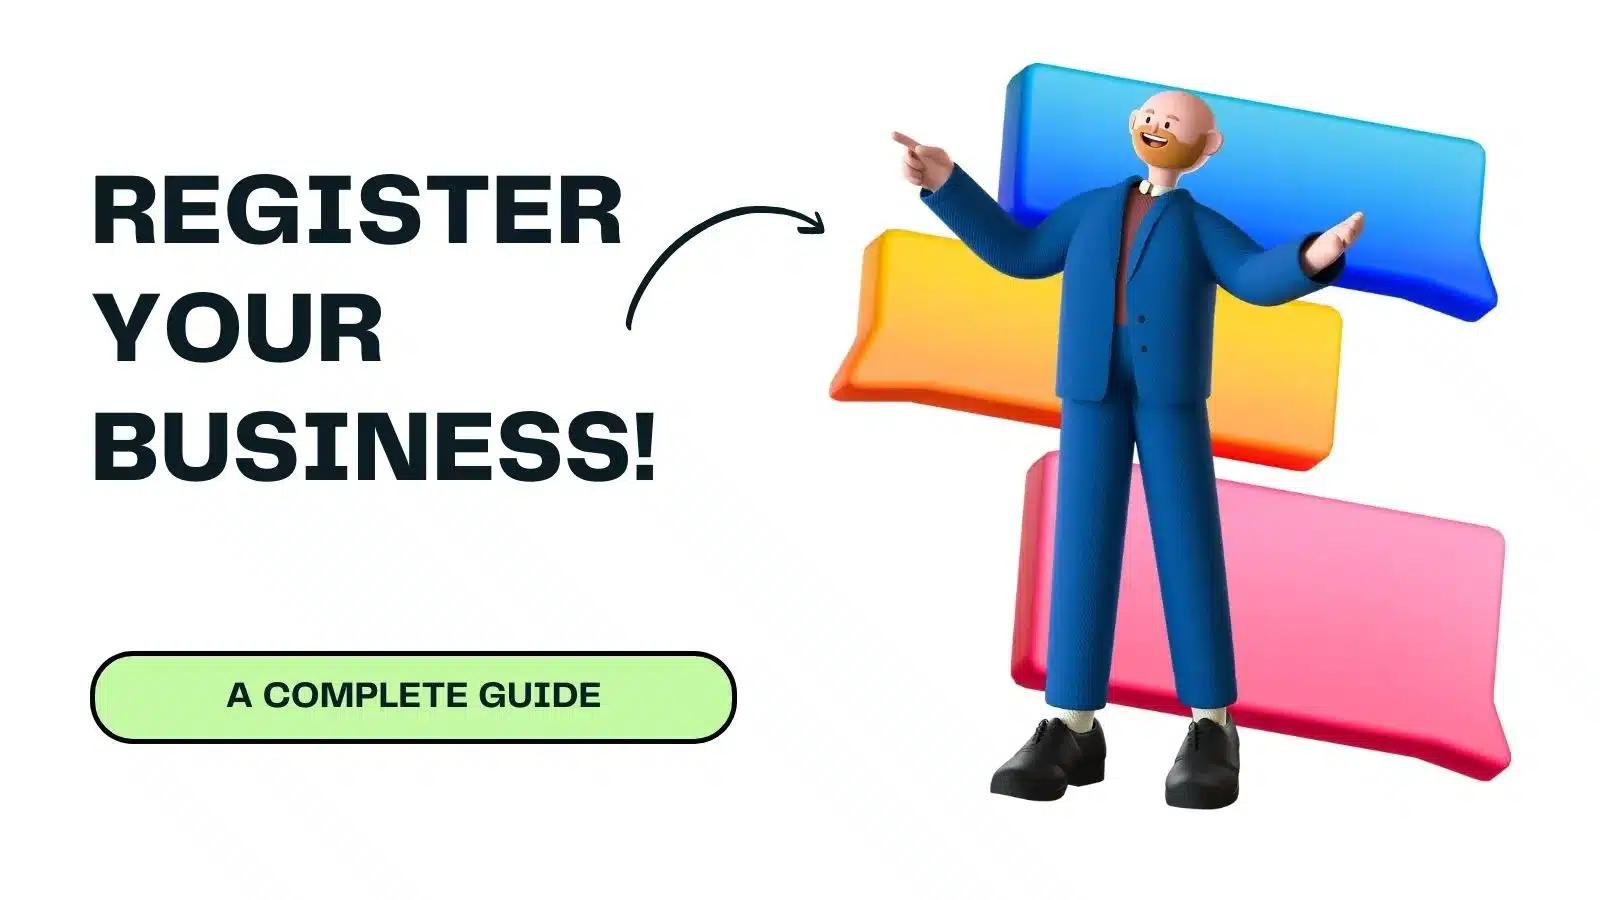 How to register your business?